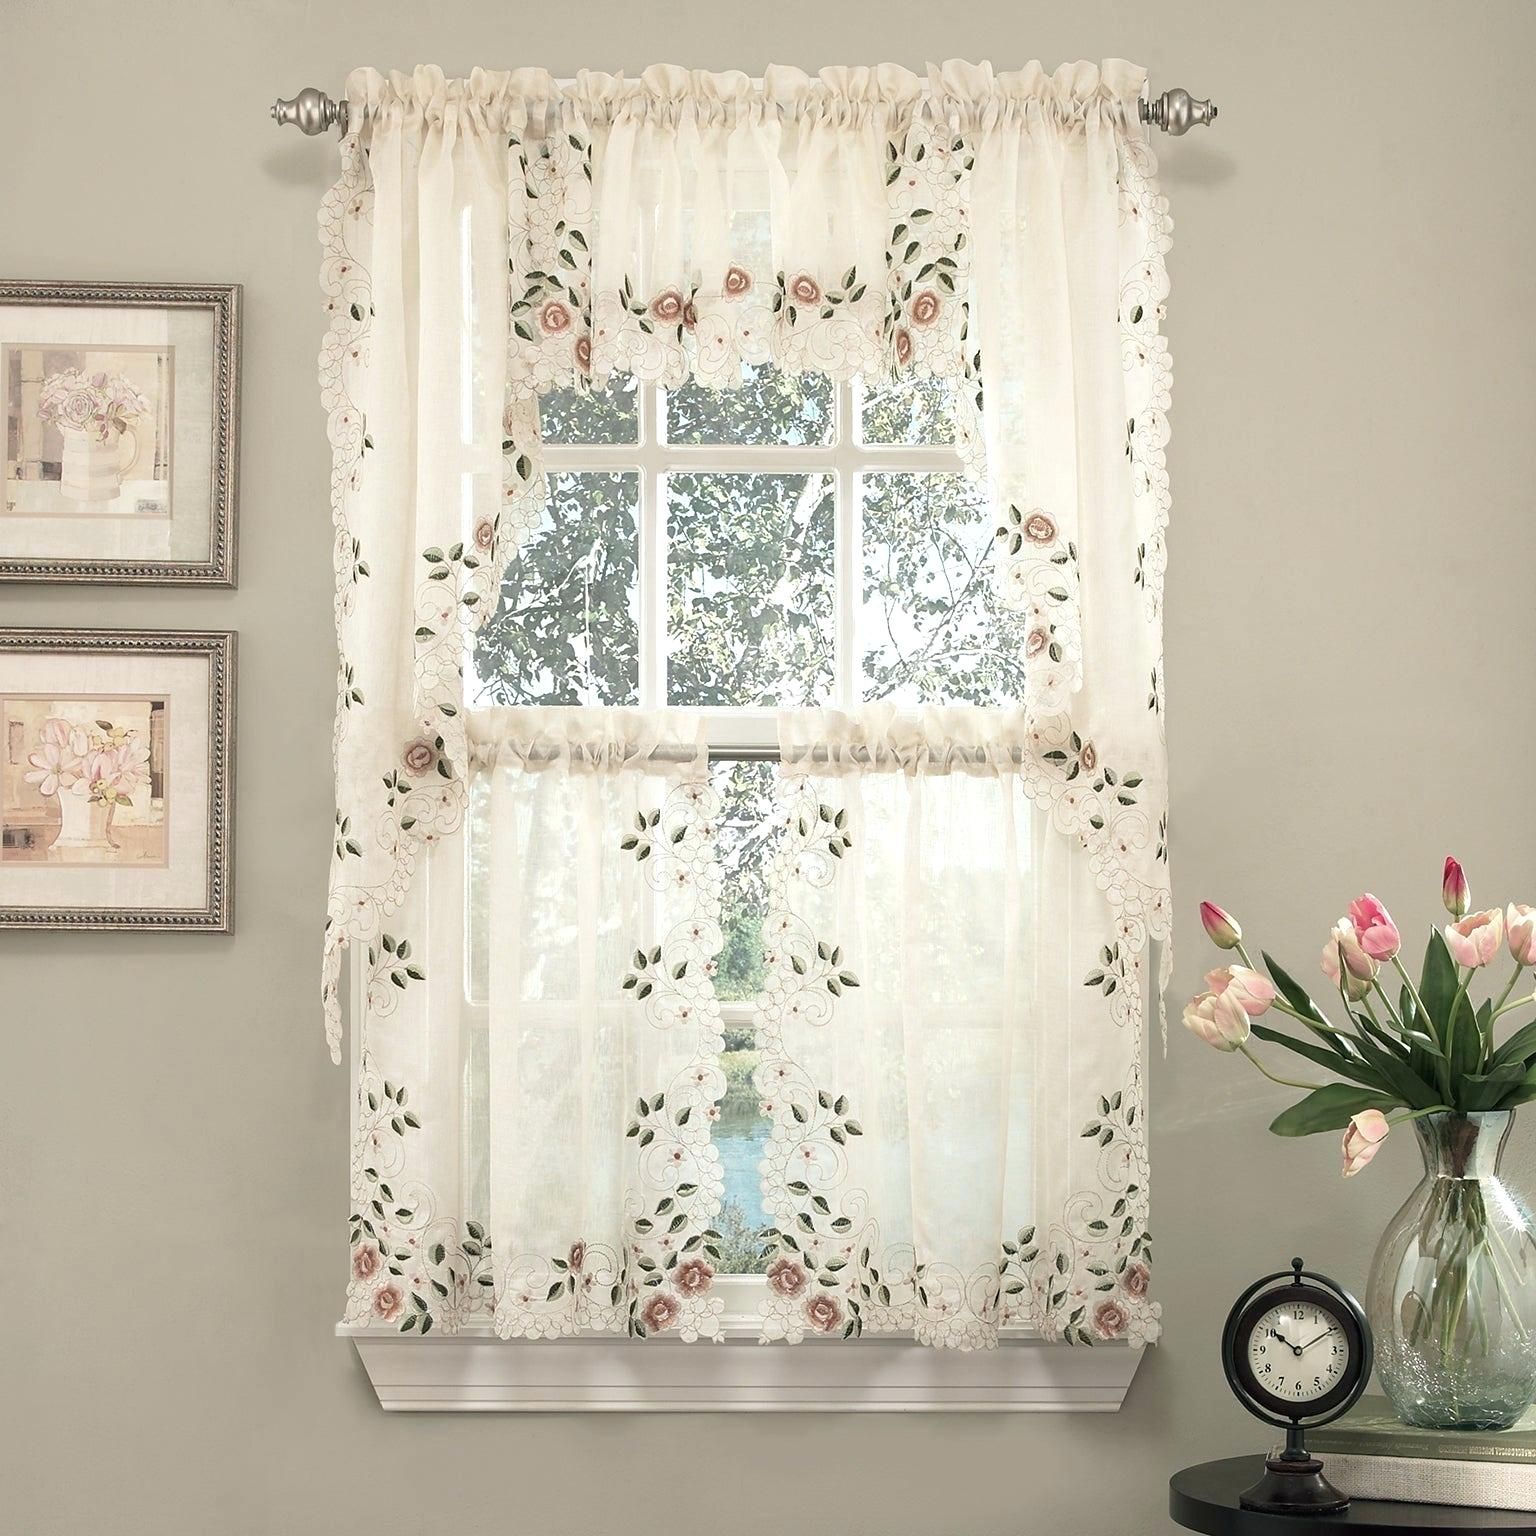 Tiered Valances Crochet Tailored Tier Pair White X – Woodspeak In Floral Lace Rod Pocket Kitchen Curtain Valance And Tiers Sets (View 14 of 20)